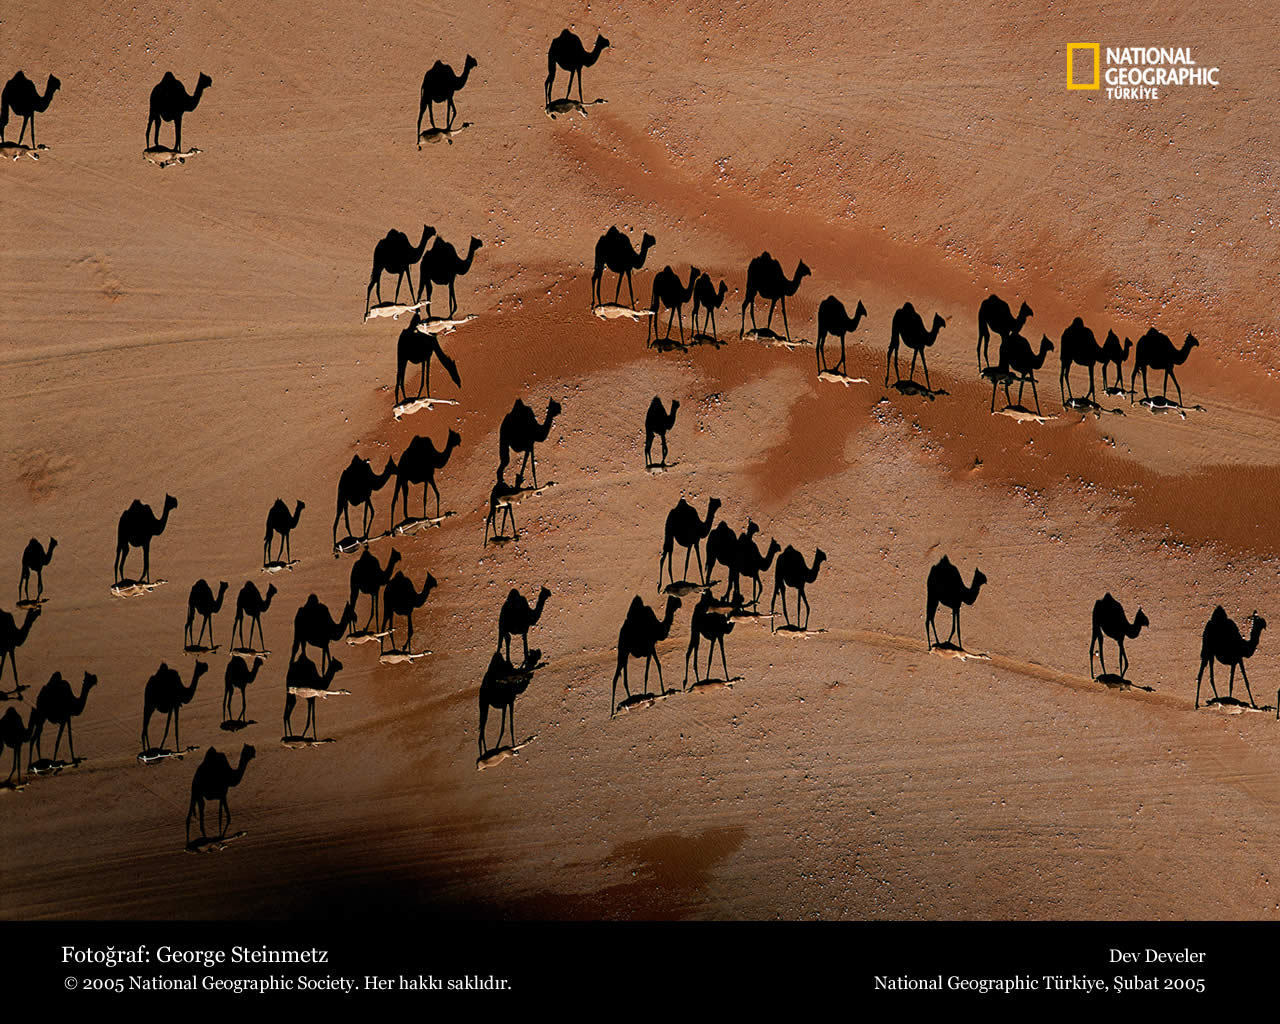 Camels-national-geographic-6901734-1280-1024.jpg